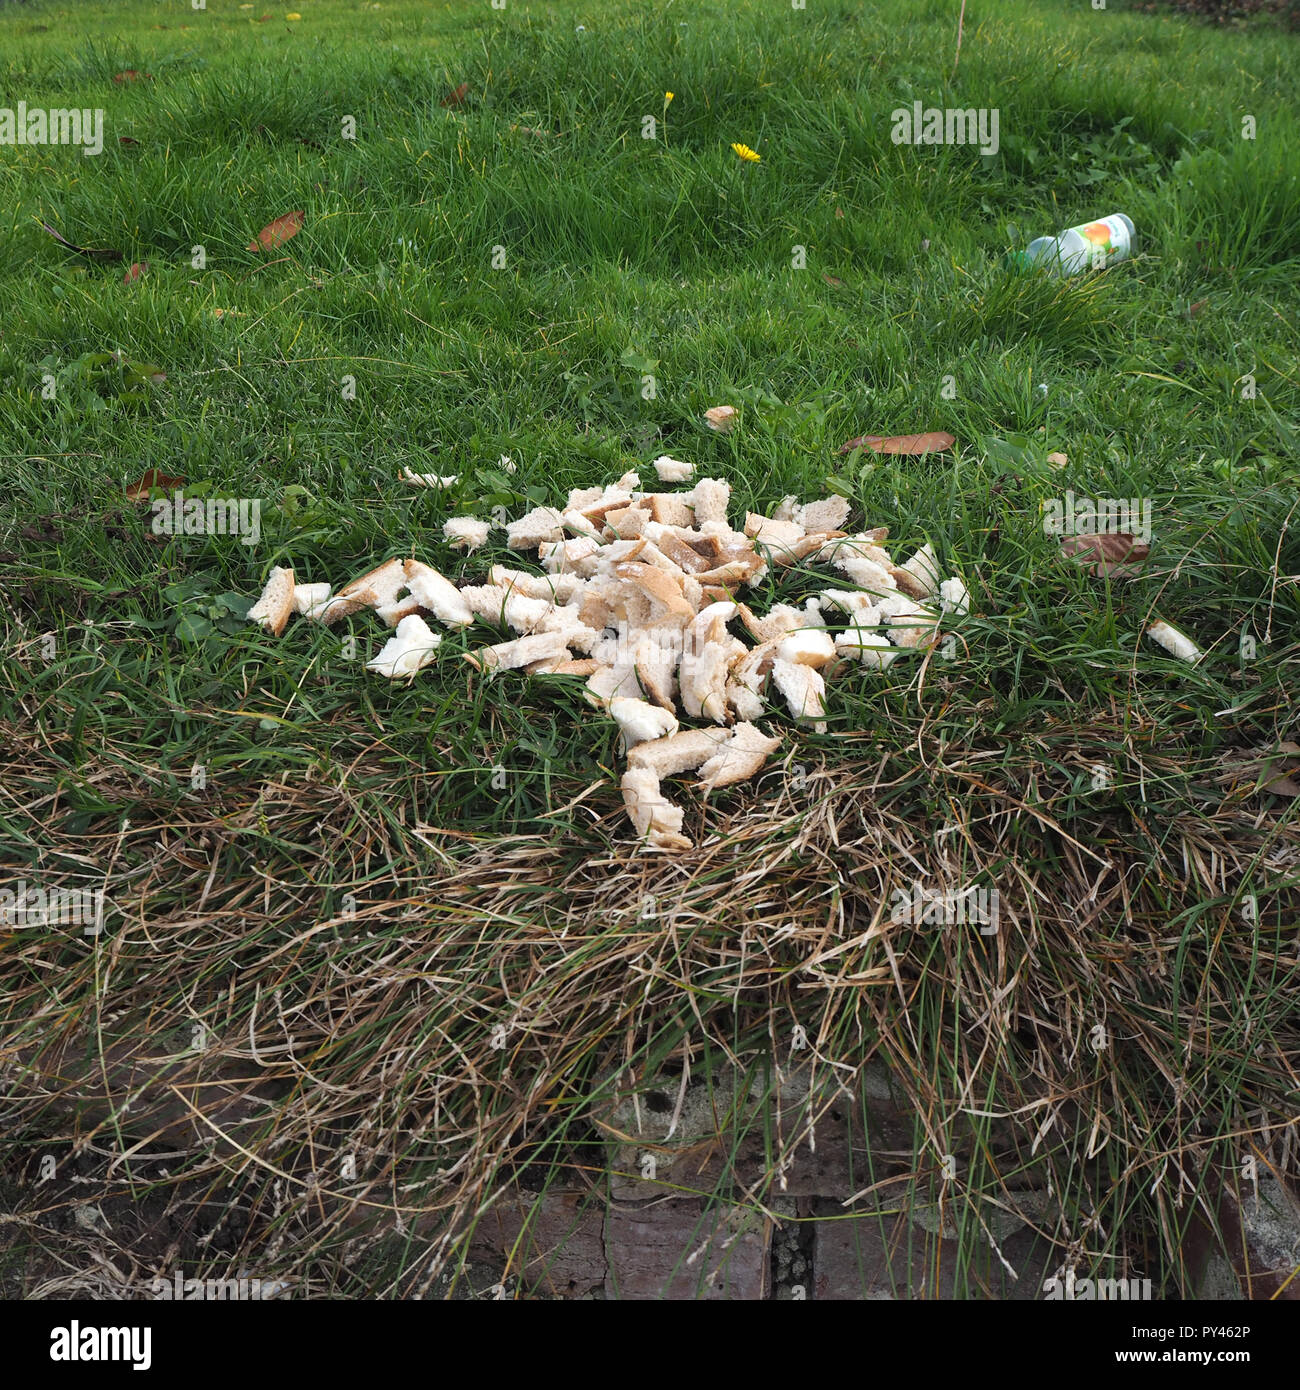 White bread broken up on lawn for bird food Stock Photo